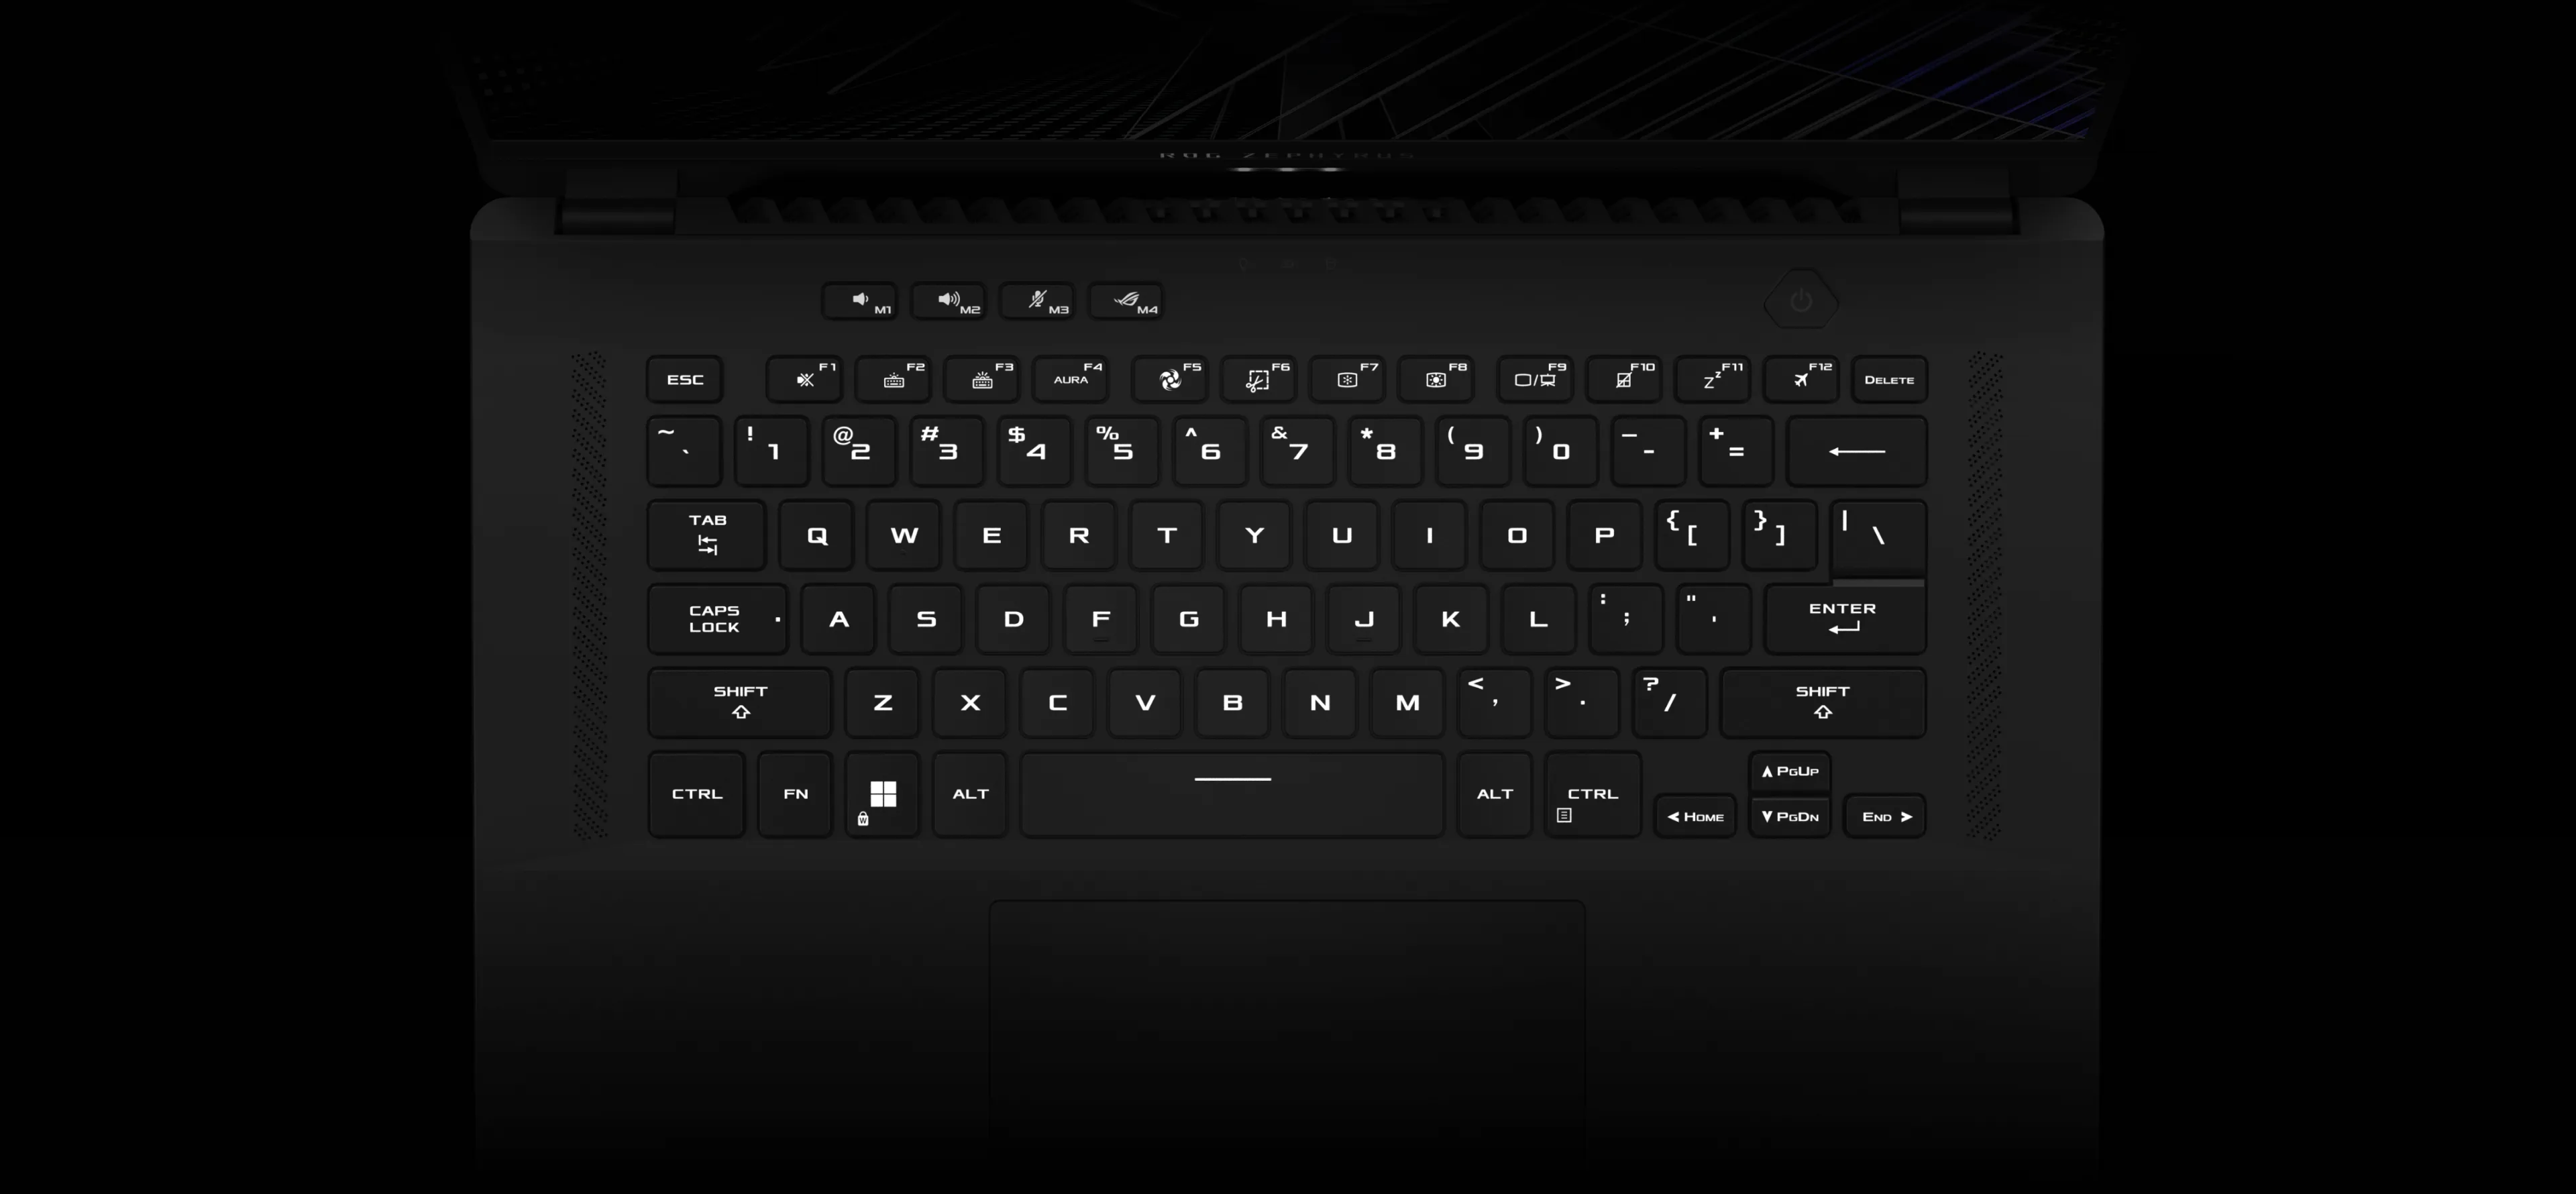 Keyboard of the M16, with single zone RGB illumination shown on keycaps.